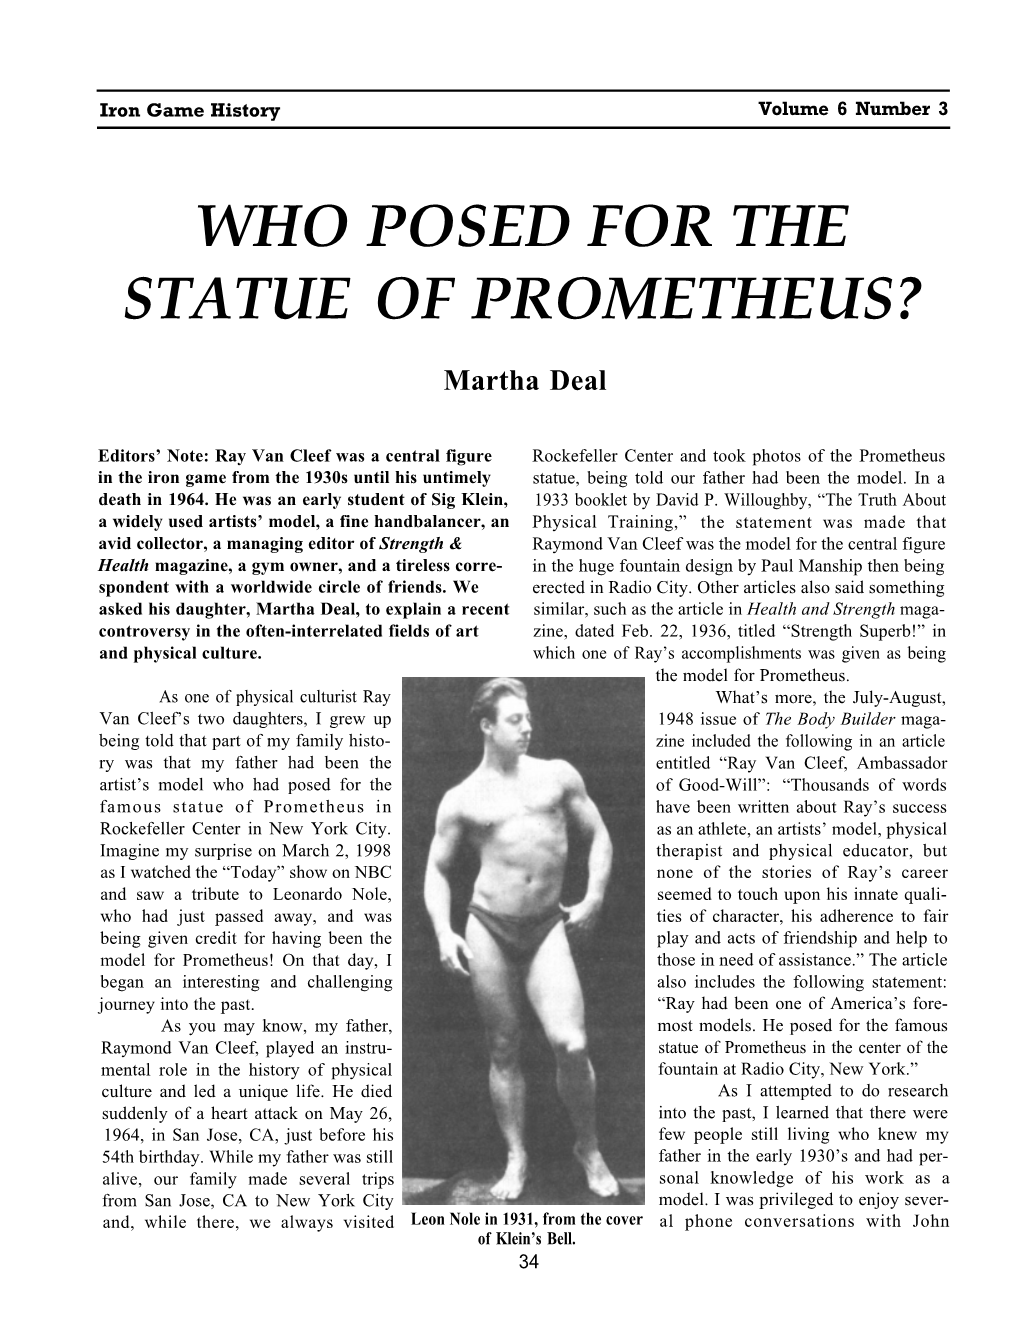 Who Posed for the Statue of Prometheus?